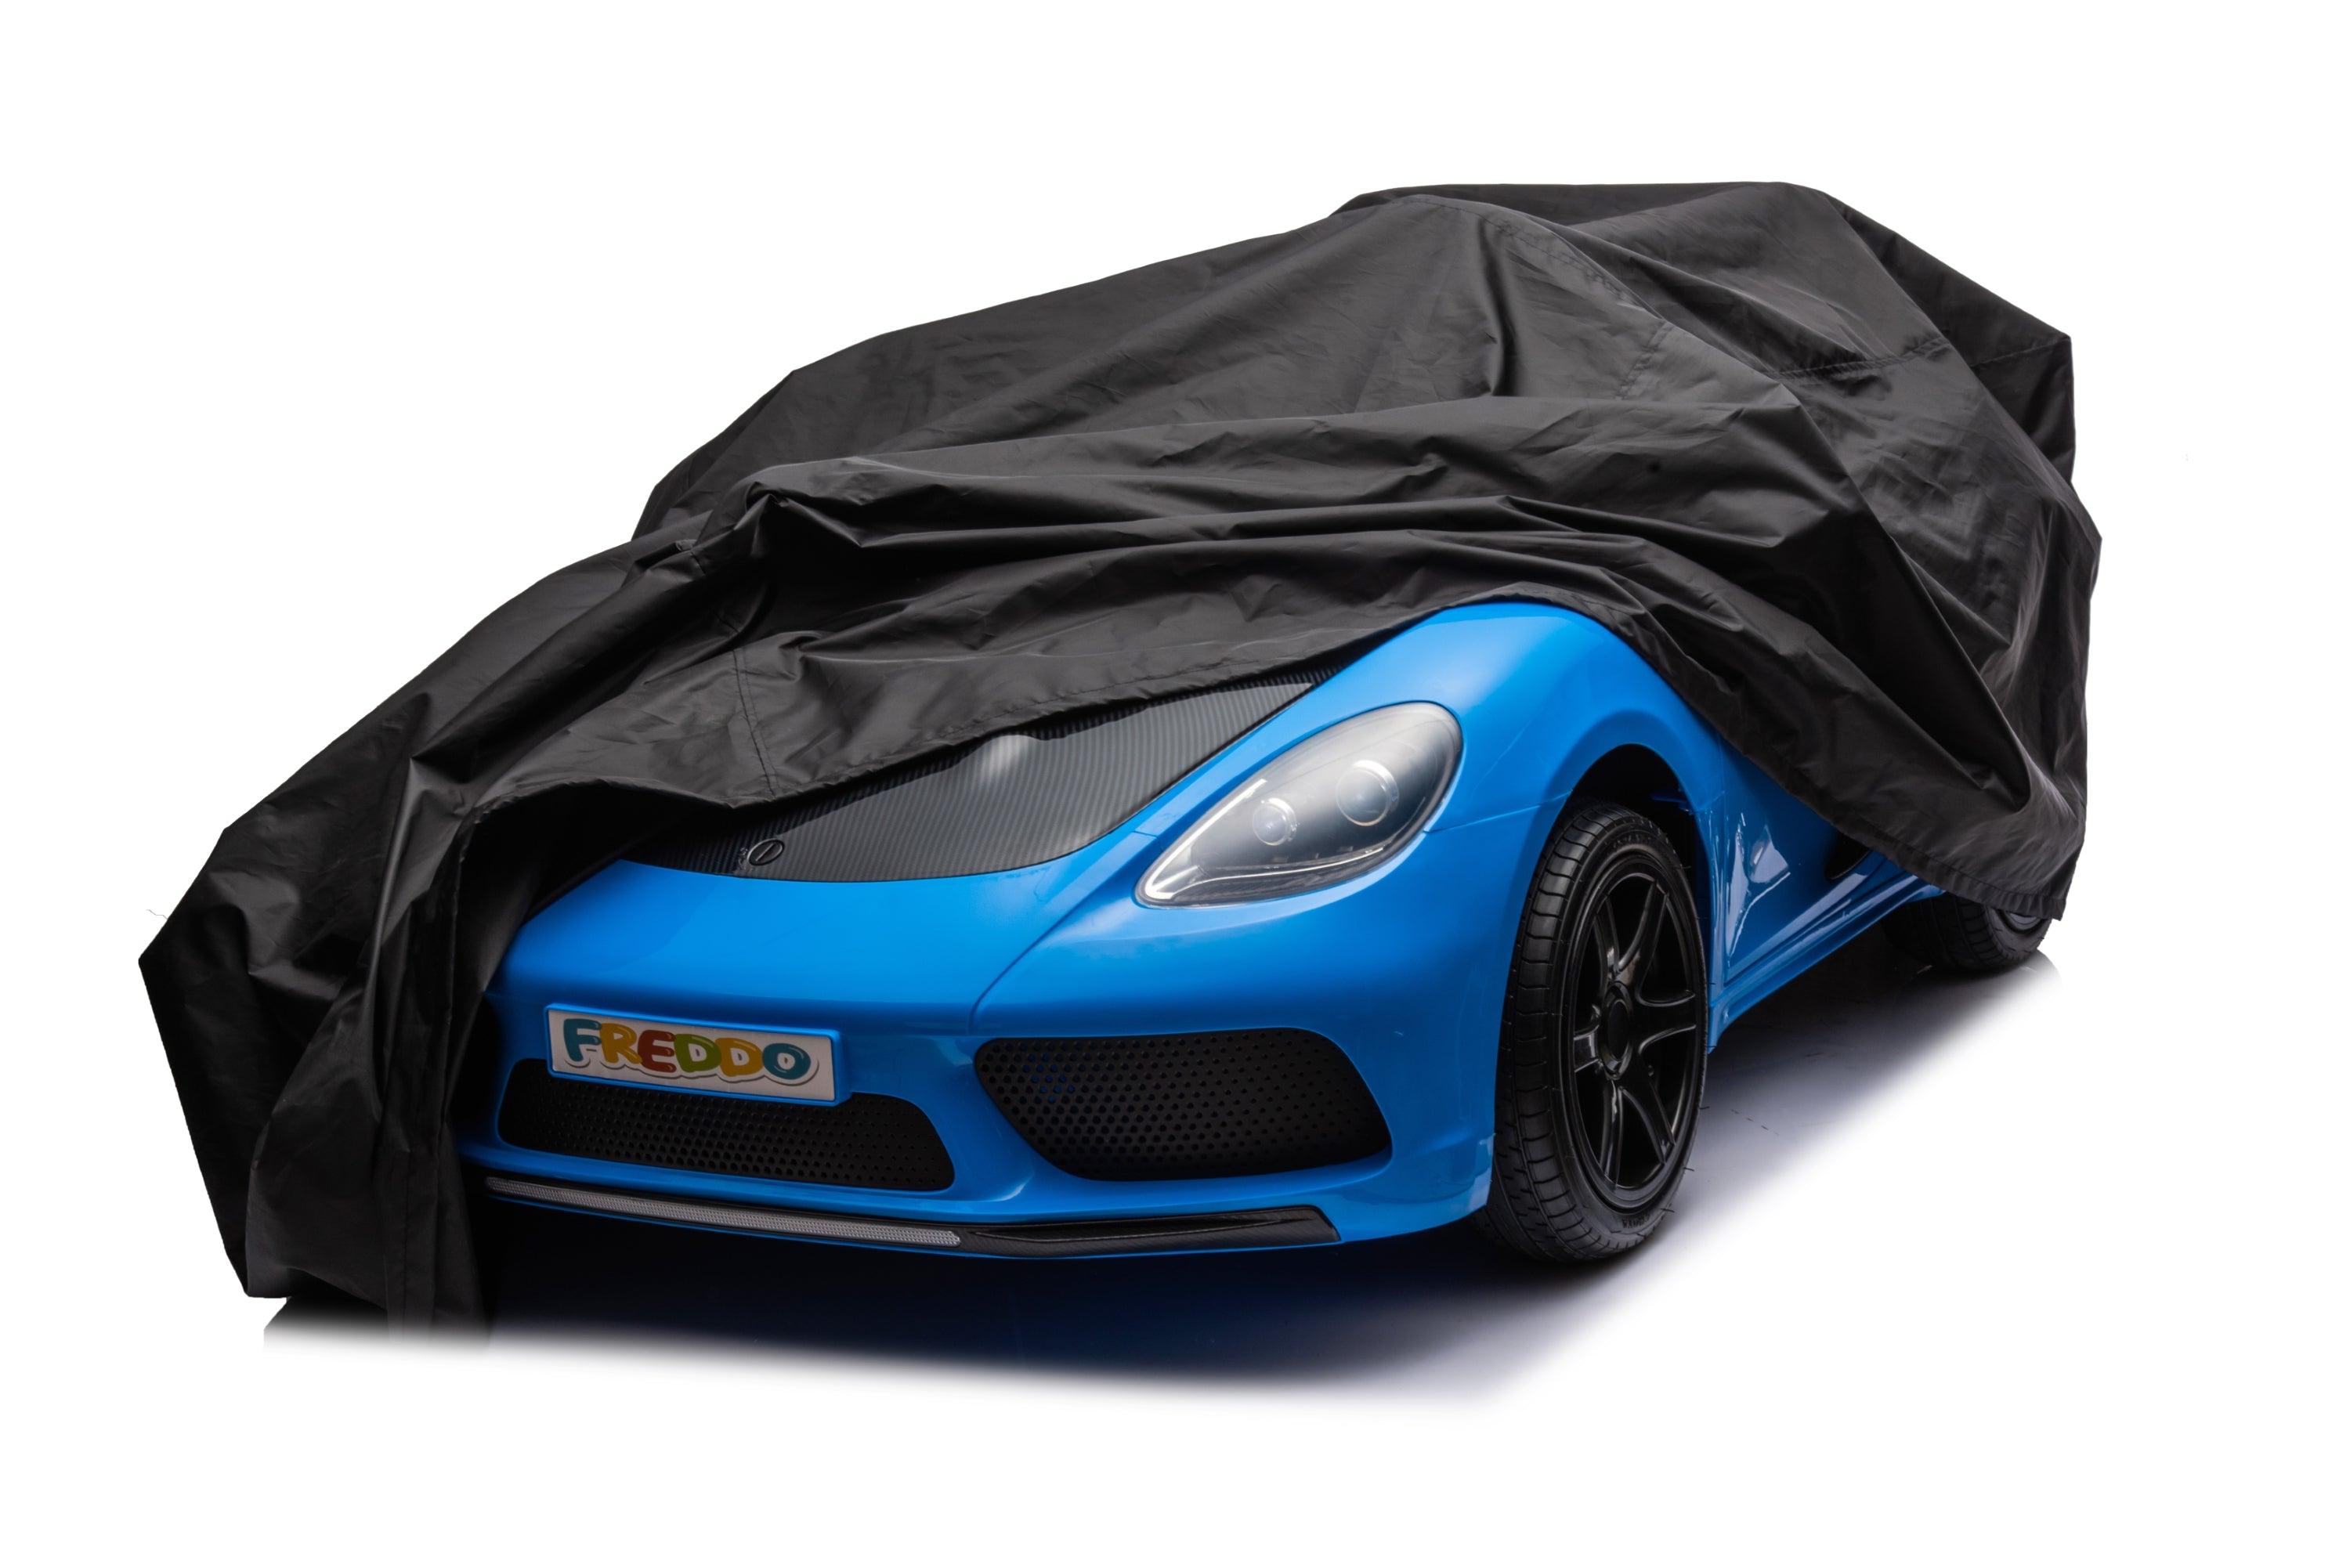 Ride on car Covers. A shield against rain, sun, dust, snow, and leaves - DTI Direct Canada